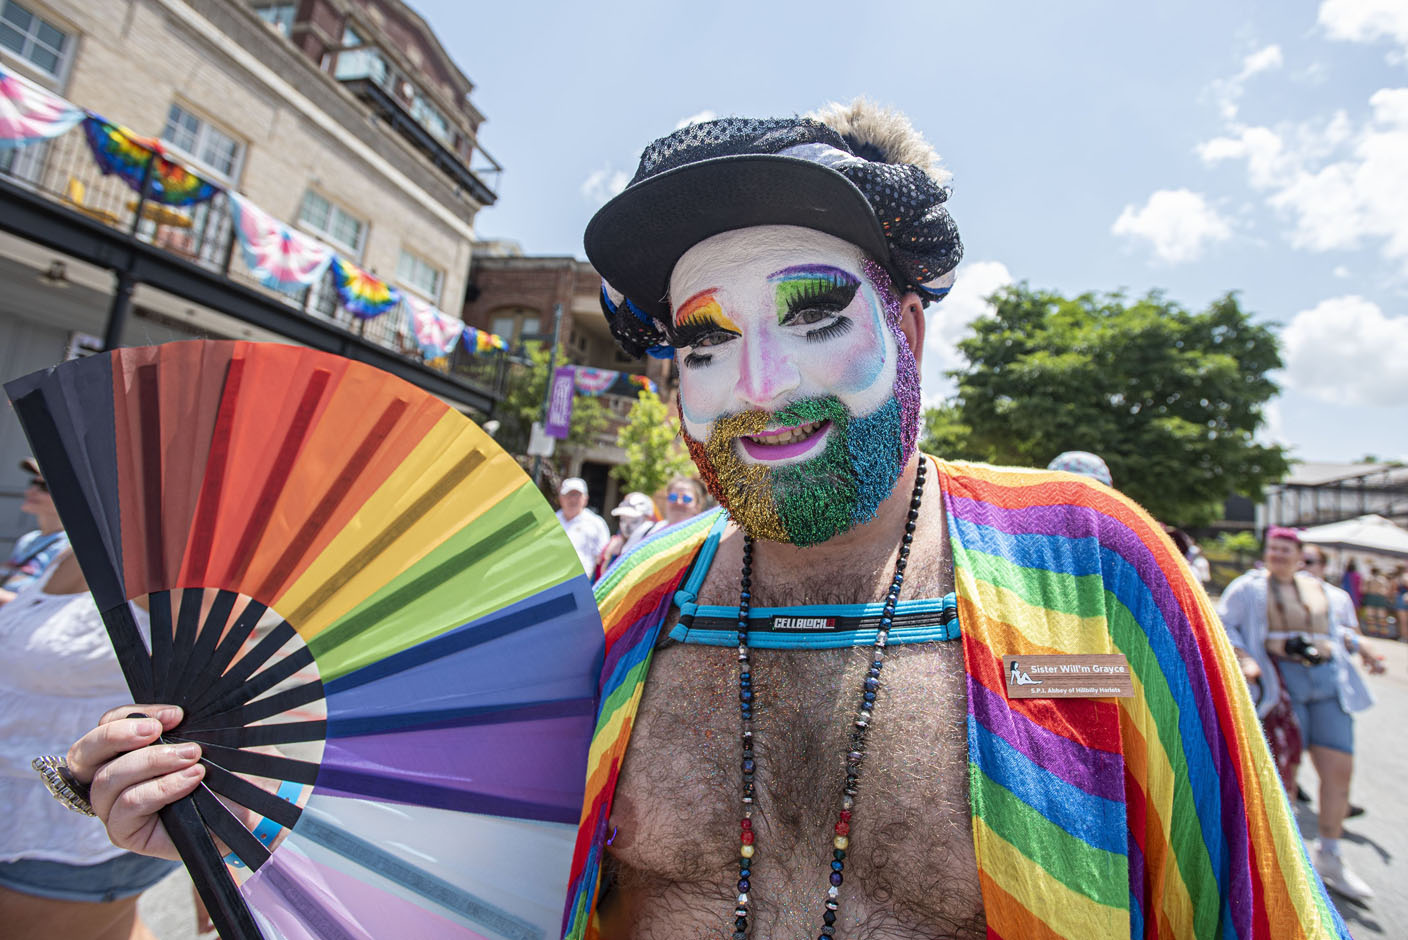 Parades! Drag Shows! Rainbows! Art! Must be time for Fayetteville’s